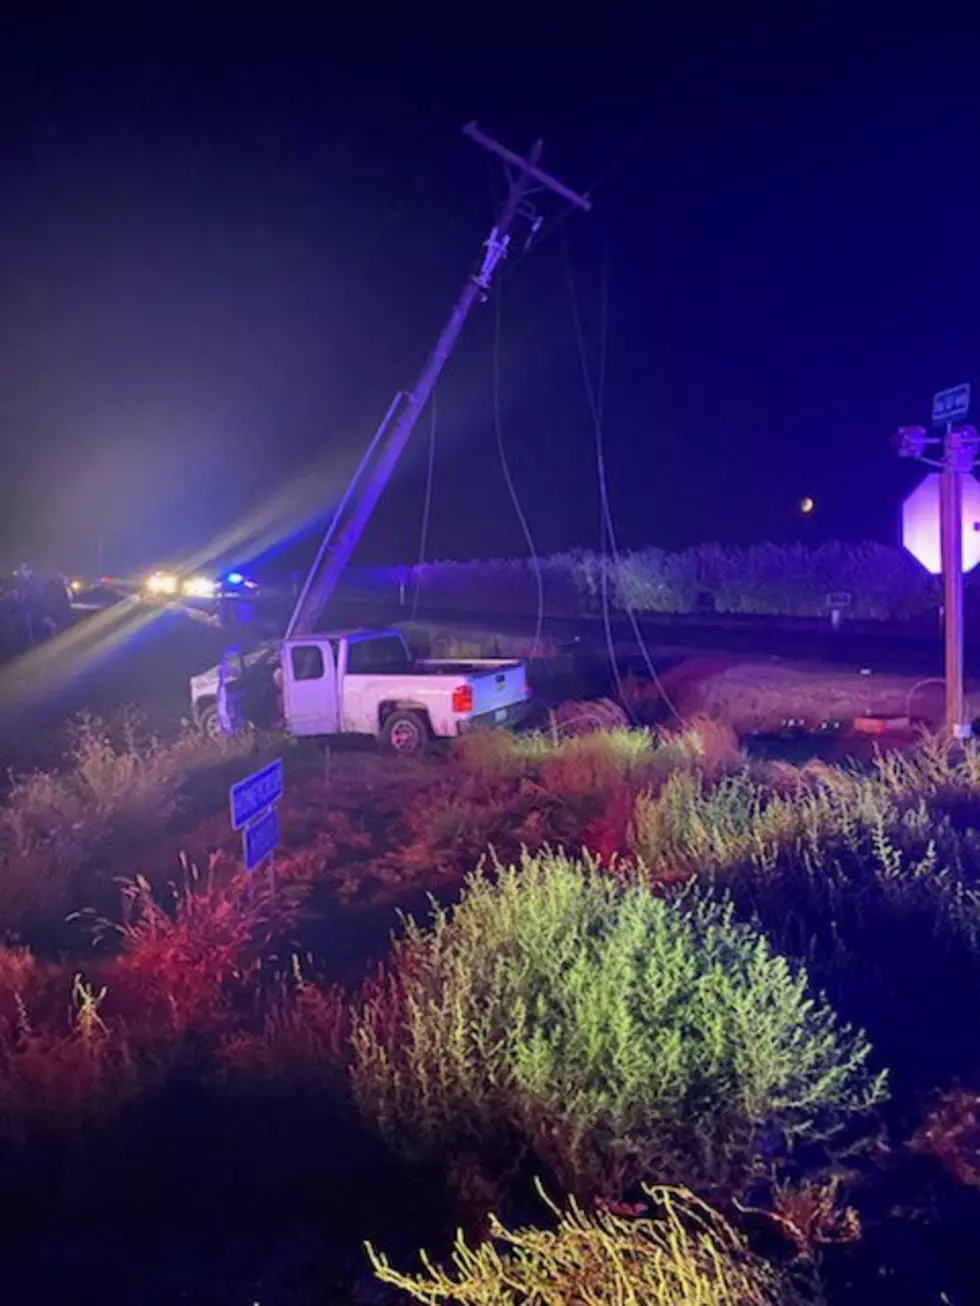 Driver Hits Power Pole Near Quincy Resulting in Massive Power Outages